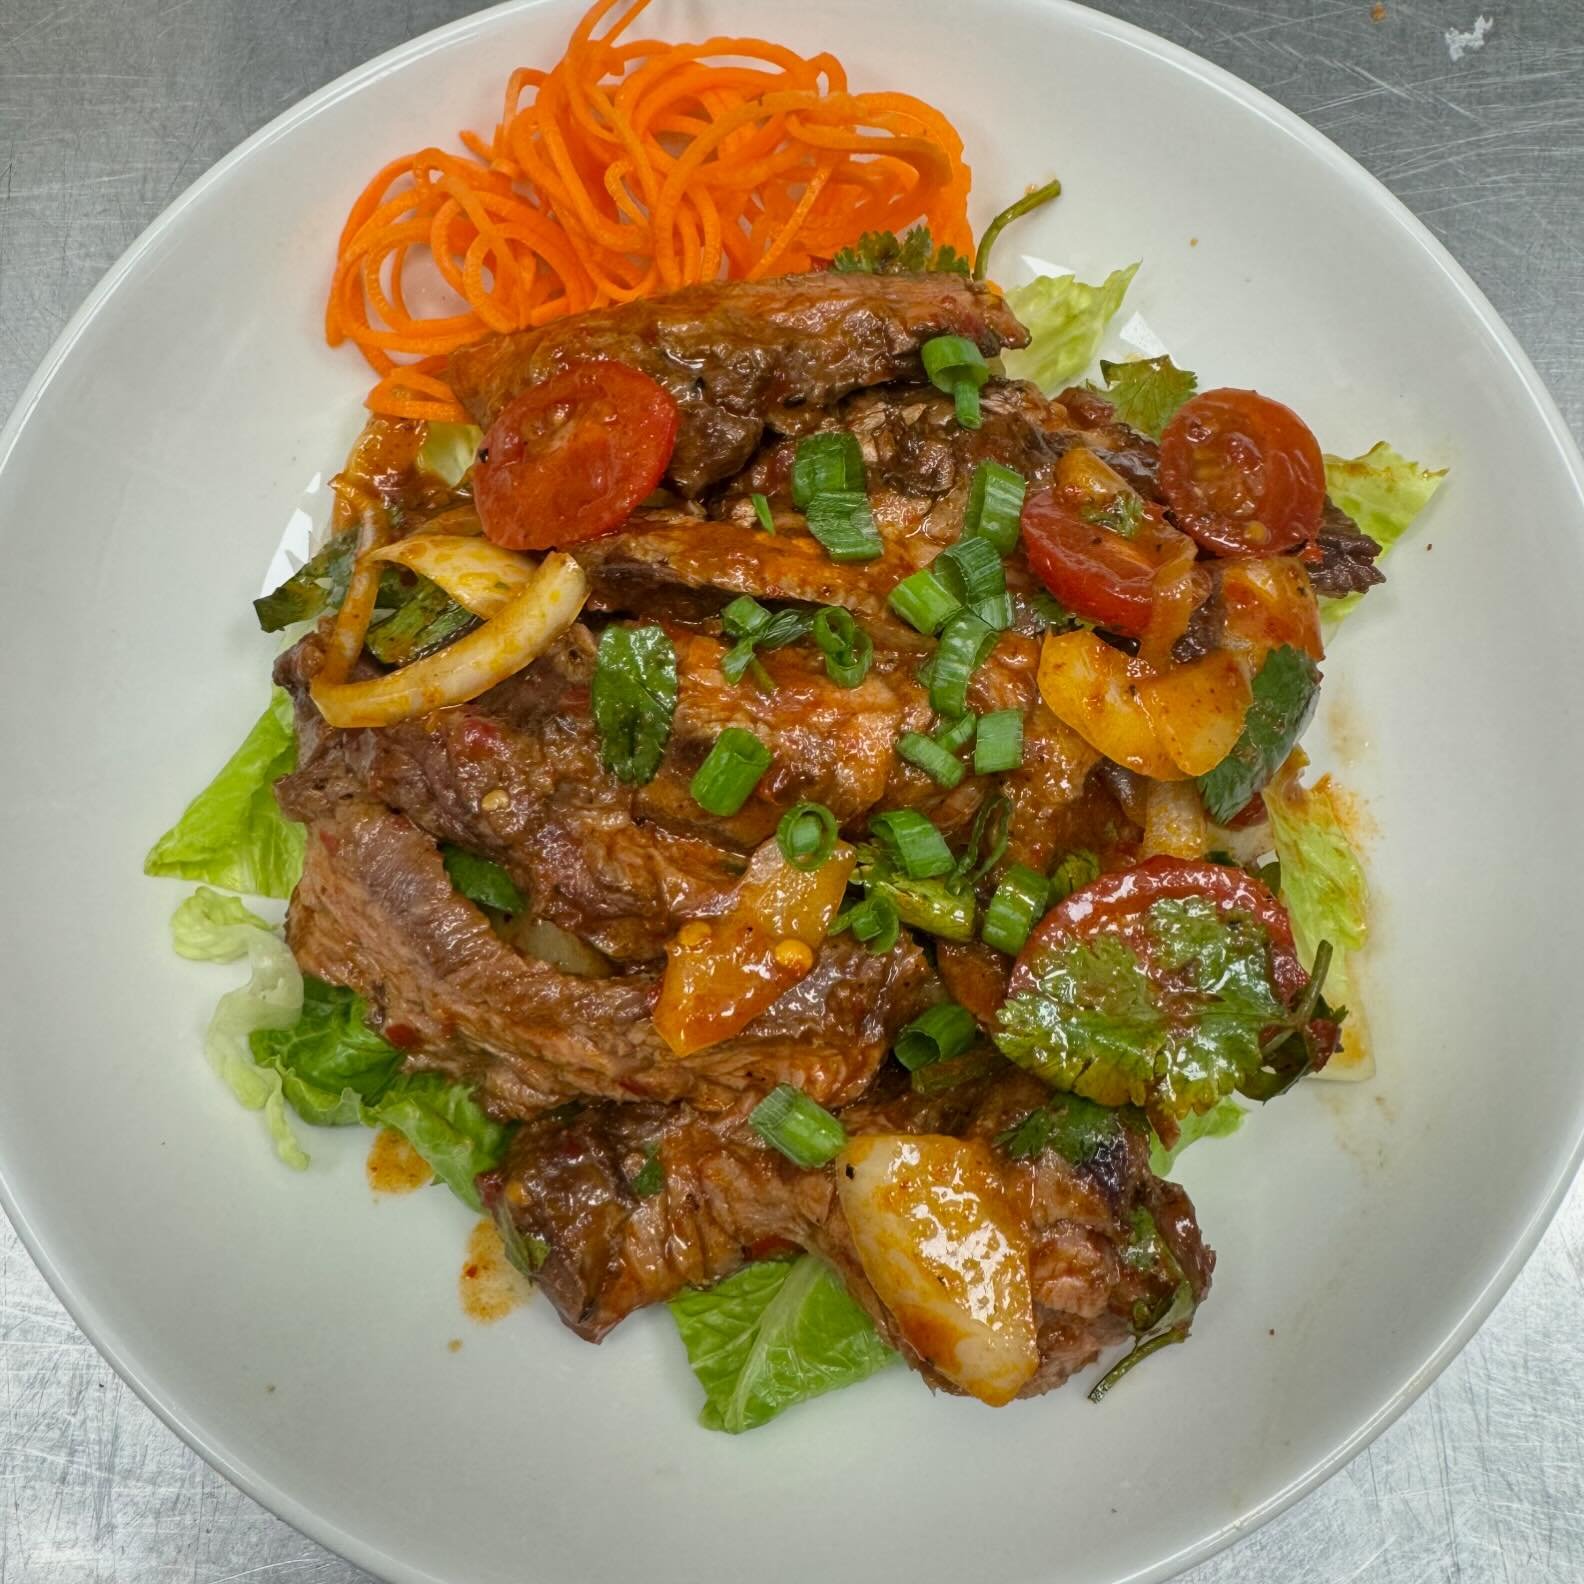 Today&rsquo;s special: Thai Beef Salad!

We open at 4pm. Happy hour is until 7pm.